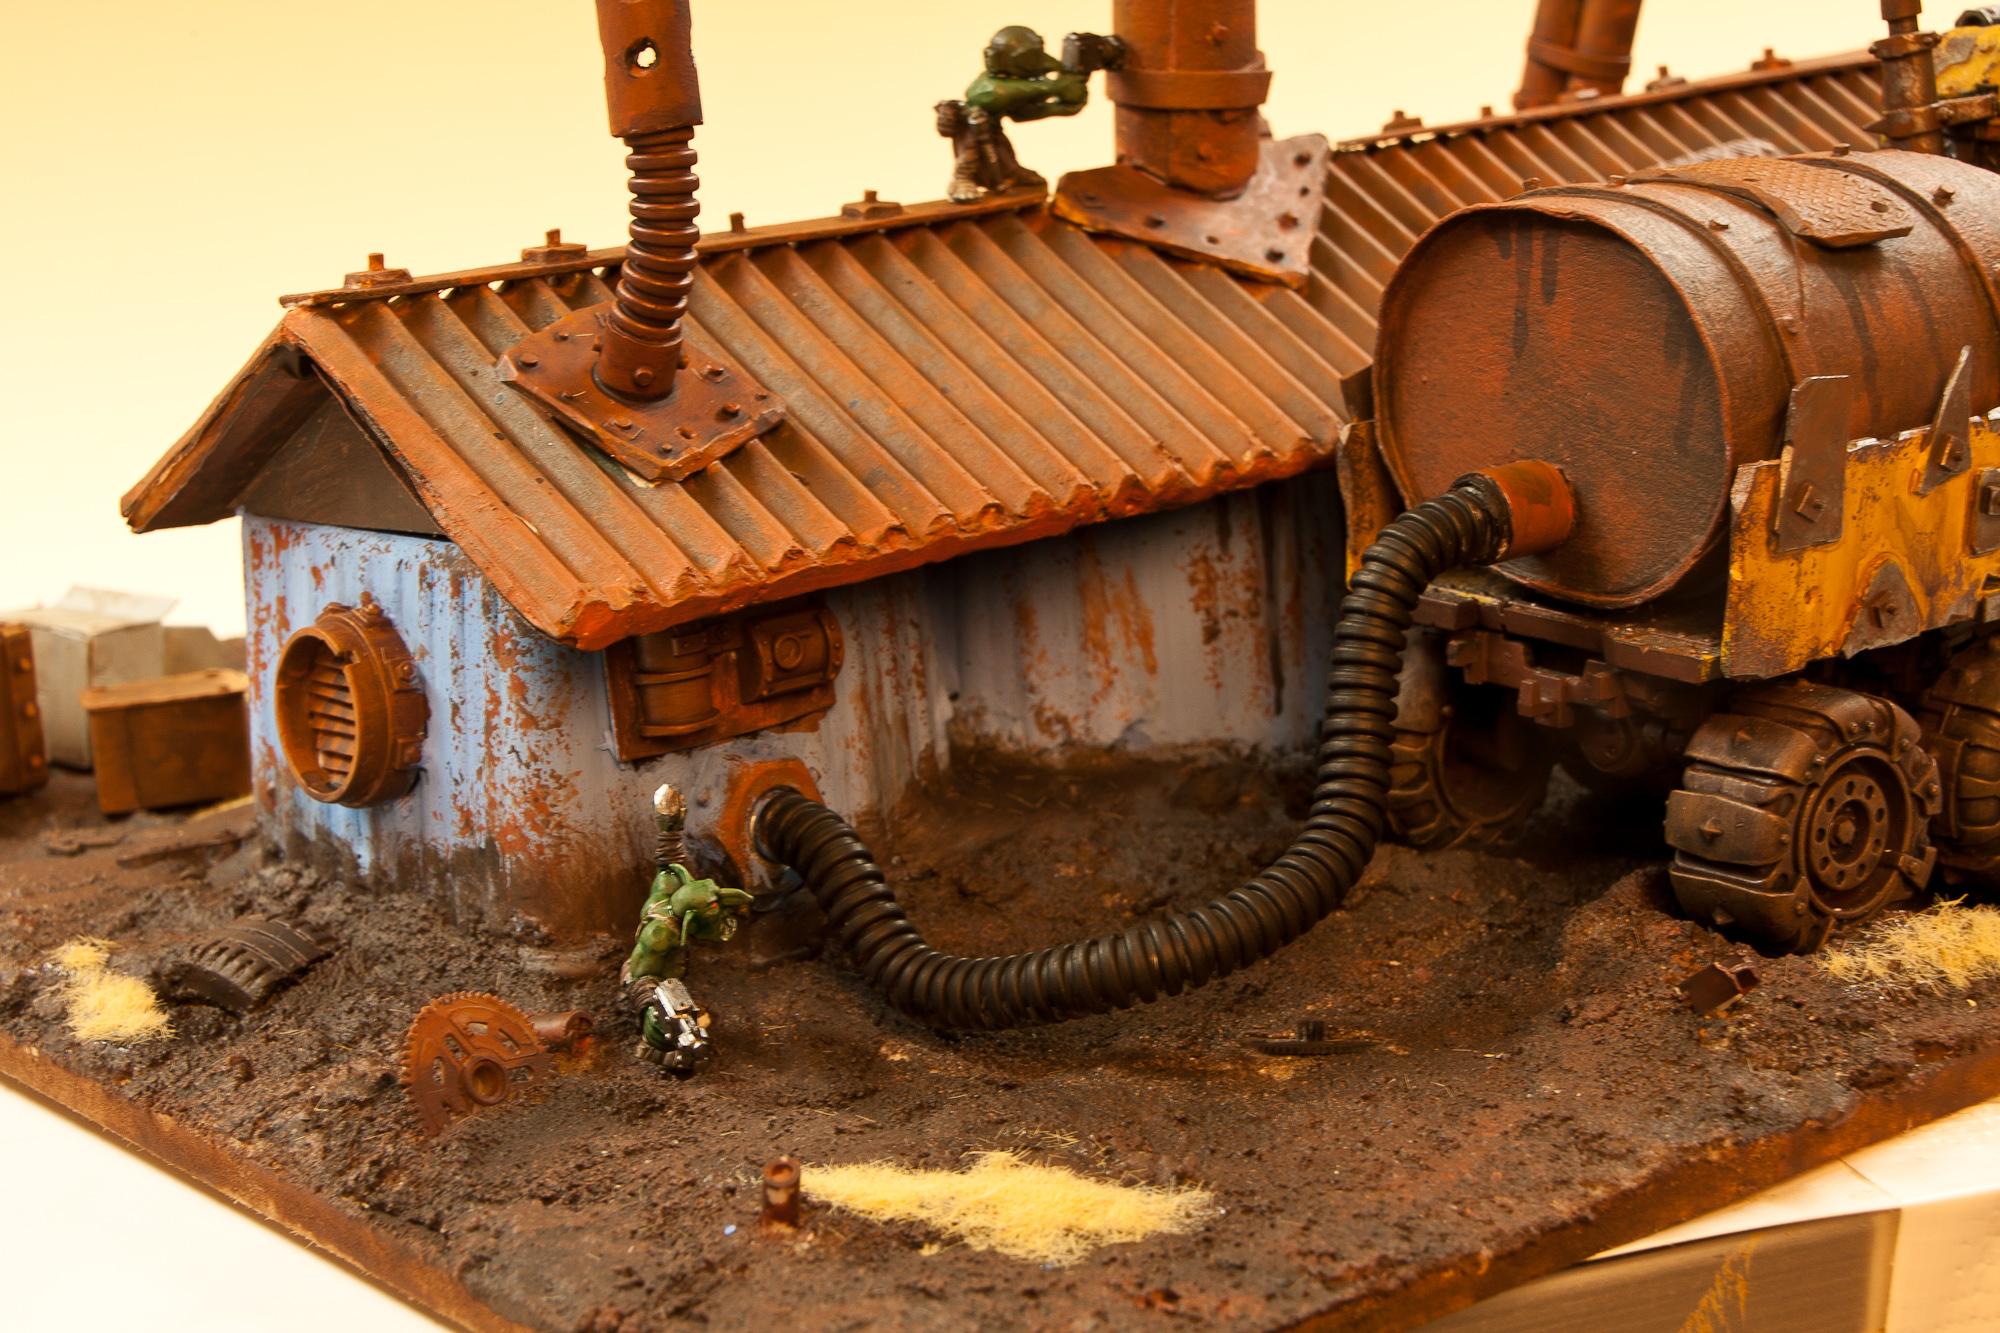 Competition, Cookie, Orks, Package, Rust, Terrain